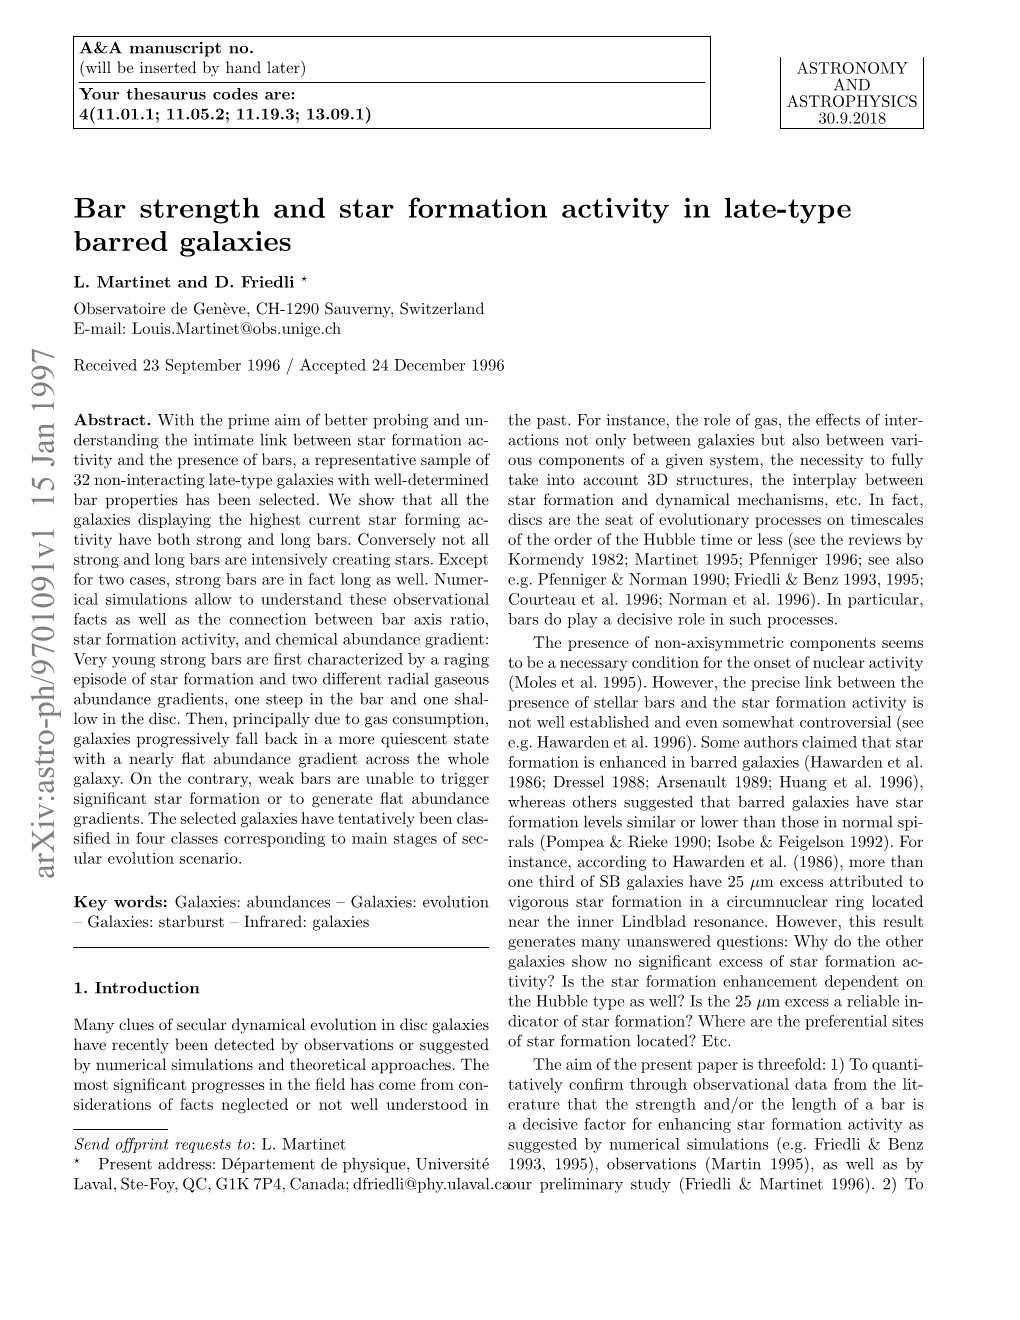 Bar Strength and Star Formation Activity in Late-Type Barred Galaxies